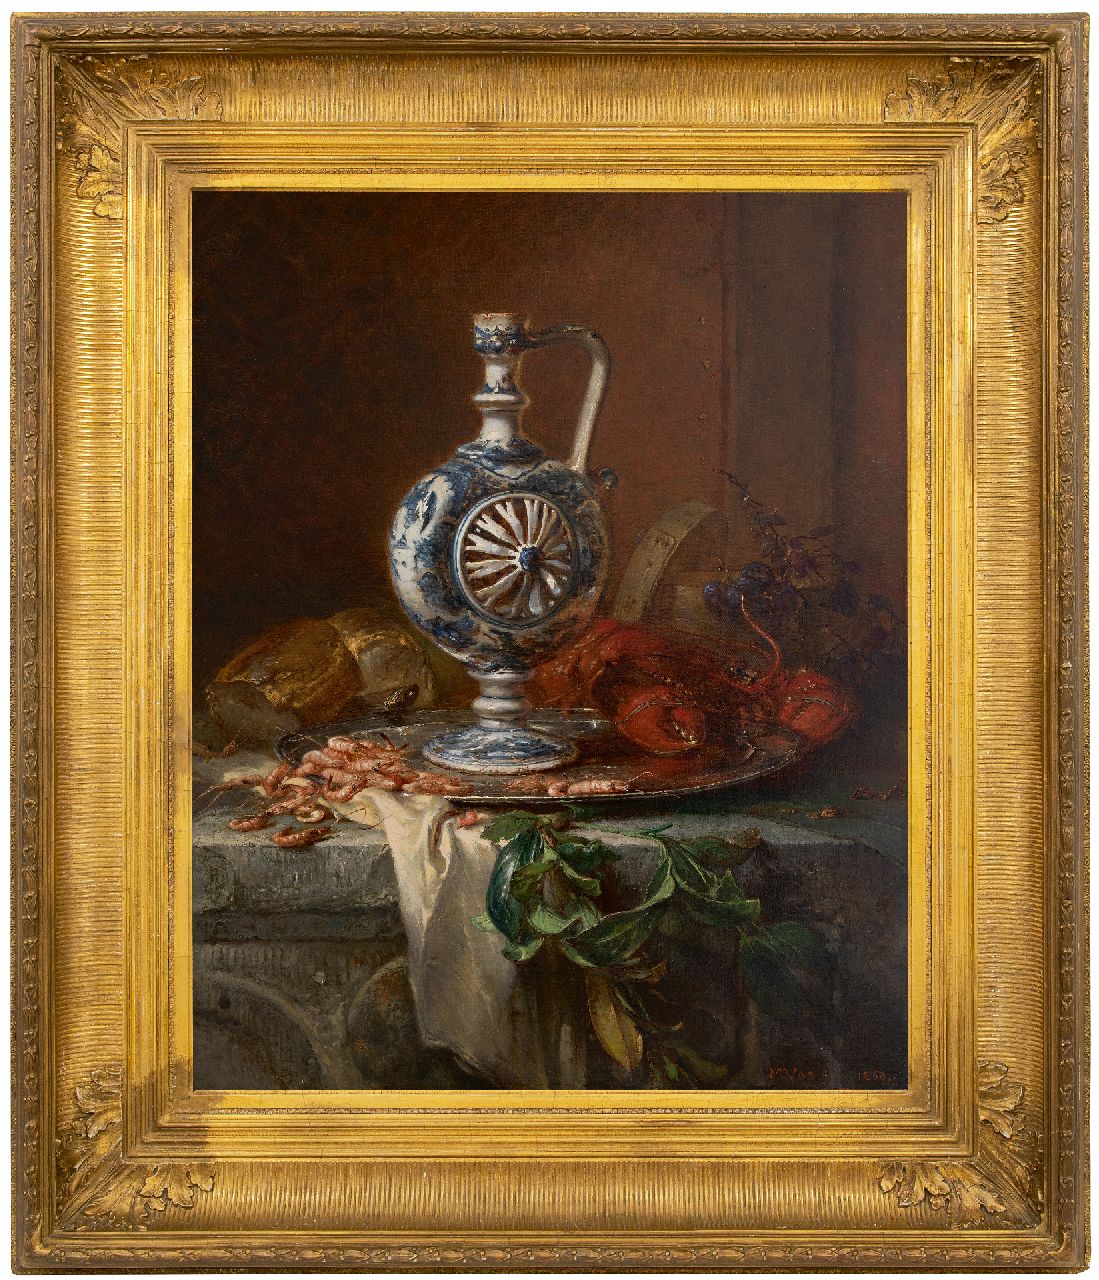 Vos M.  | Maria Vos | Paintings offered for sale | Still life with earthenware jug, pewter bowl, lobster and shrimp, oil on canvas 84.4 x 67.3 cm, signed l.r. and dated 'Jan' 1868